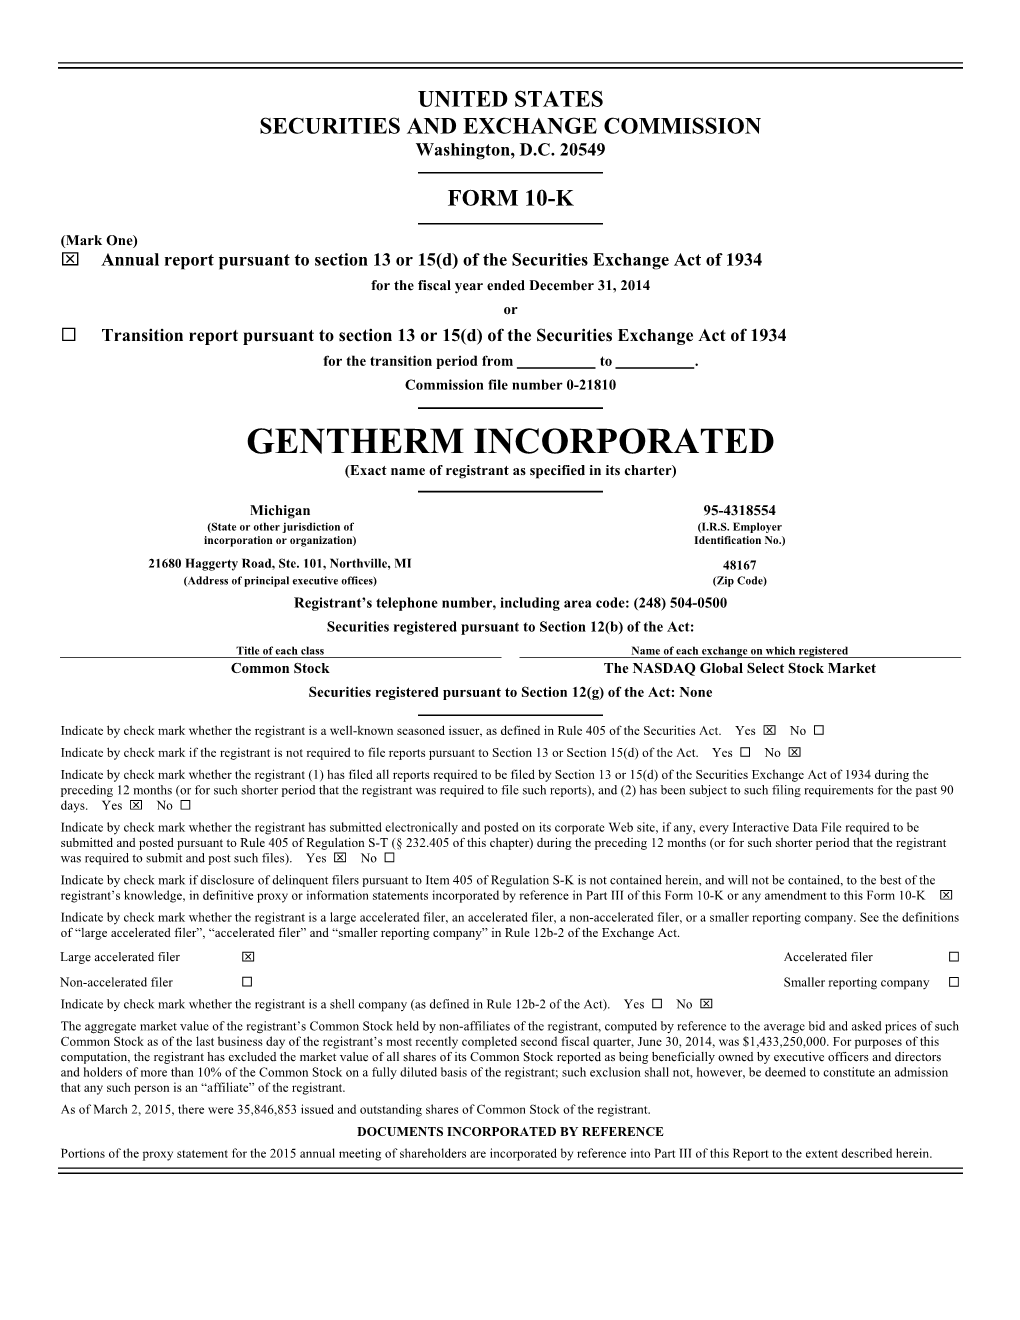 GENTHERM INCORPORATED (Exact Name of Registrant As Specified in Its Charter)